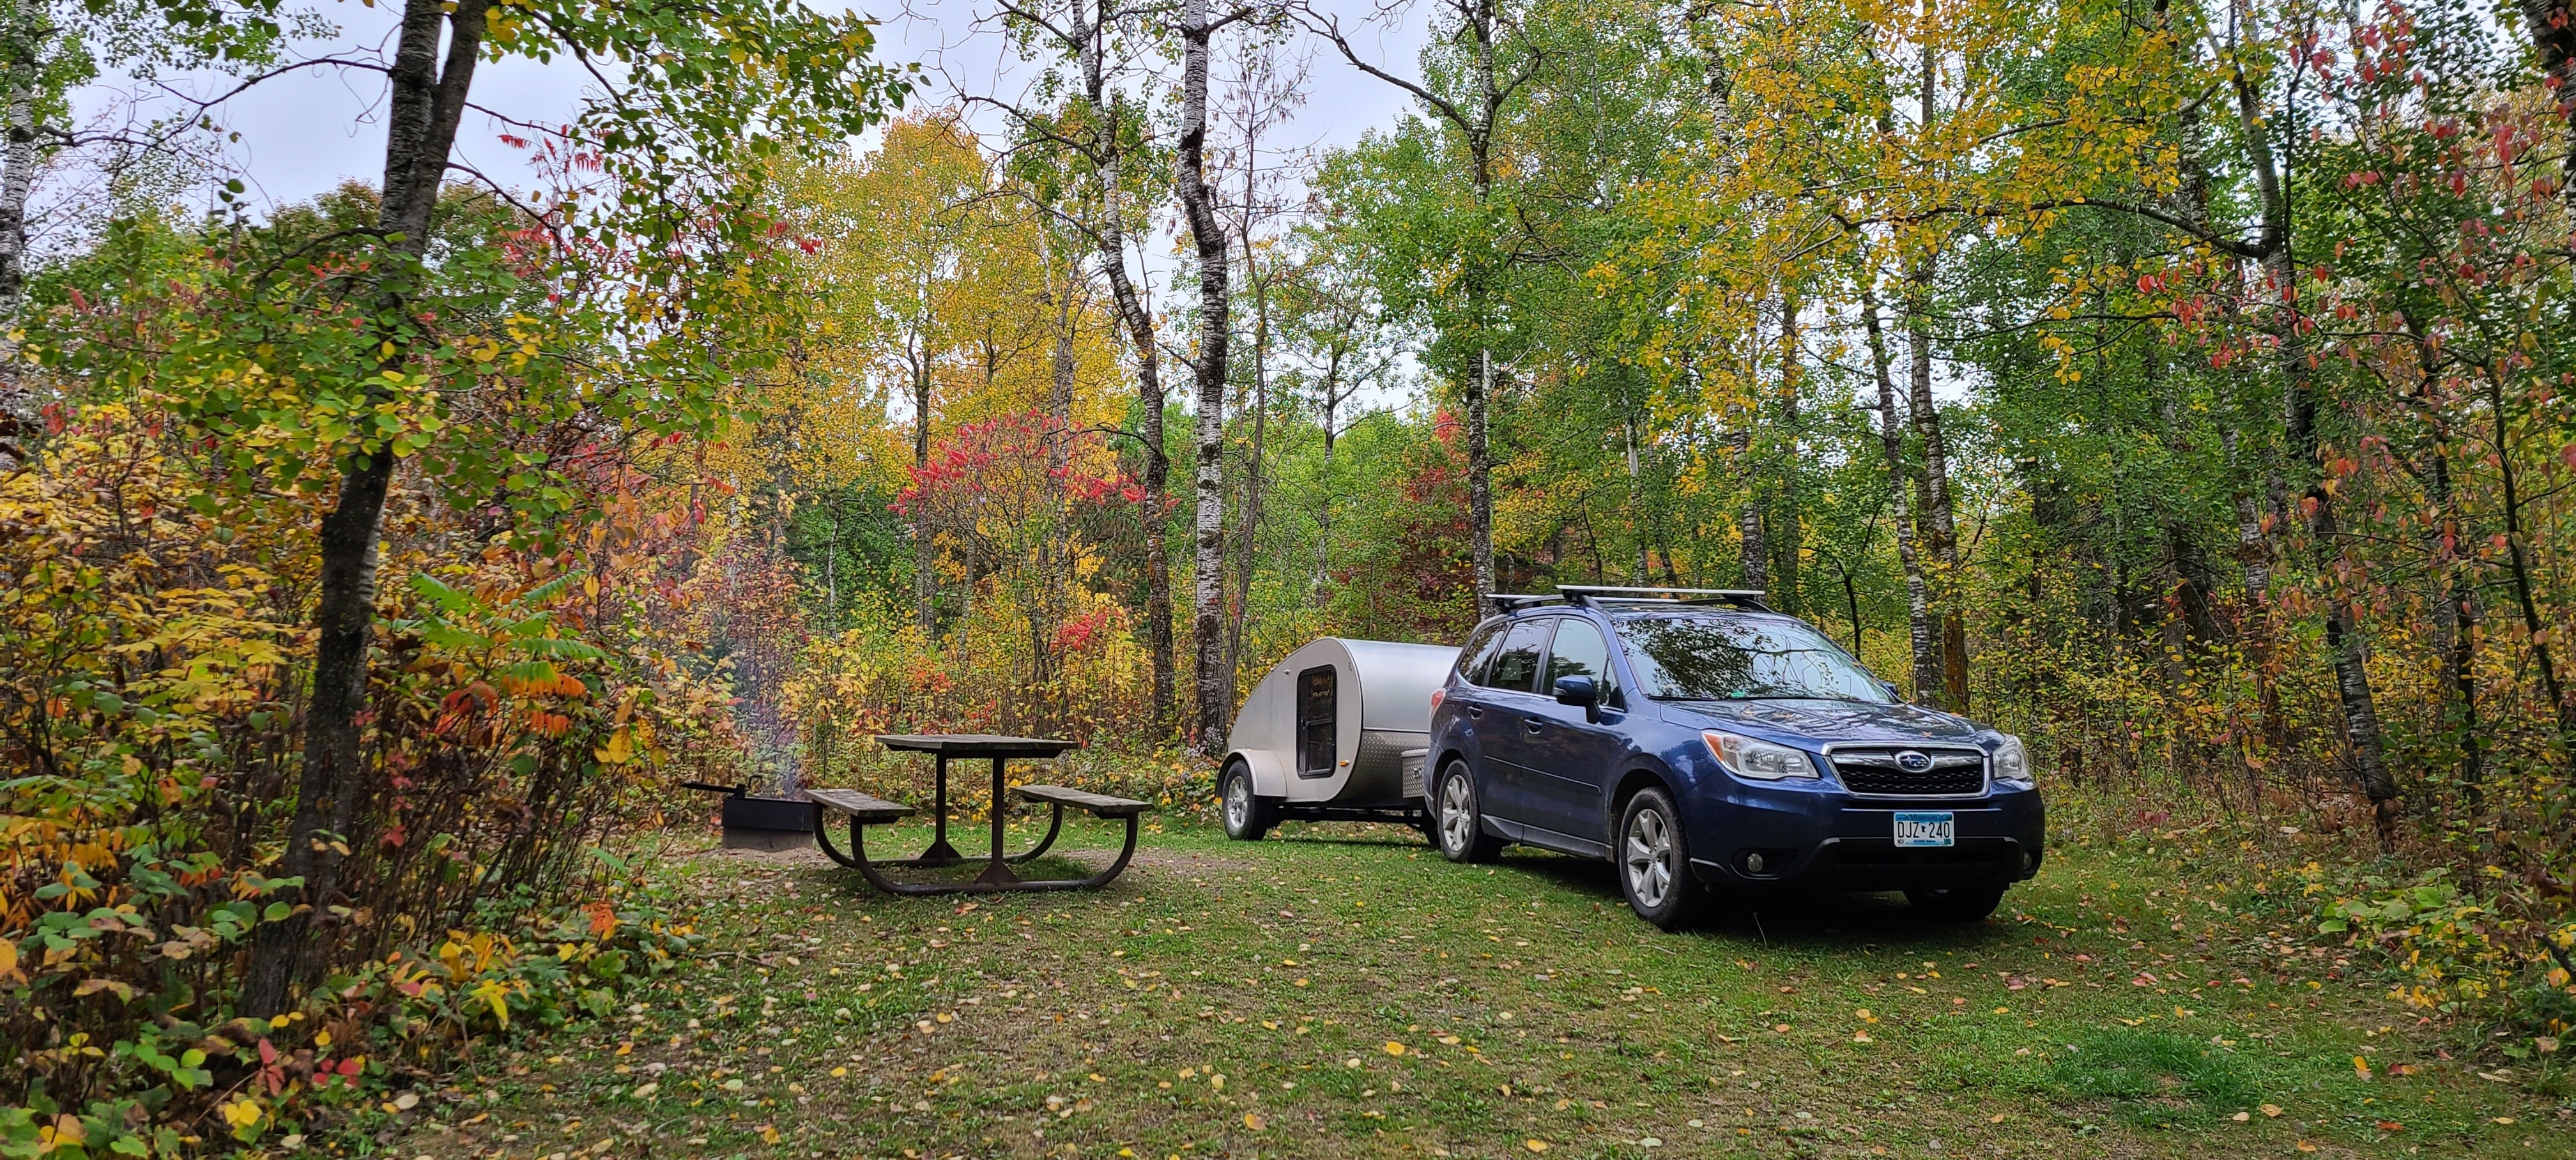 Plenty of space for tents, small trailers, and even small rvs. Tucked back in the trees!